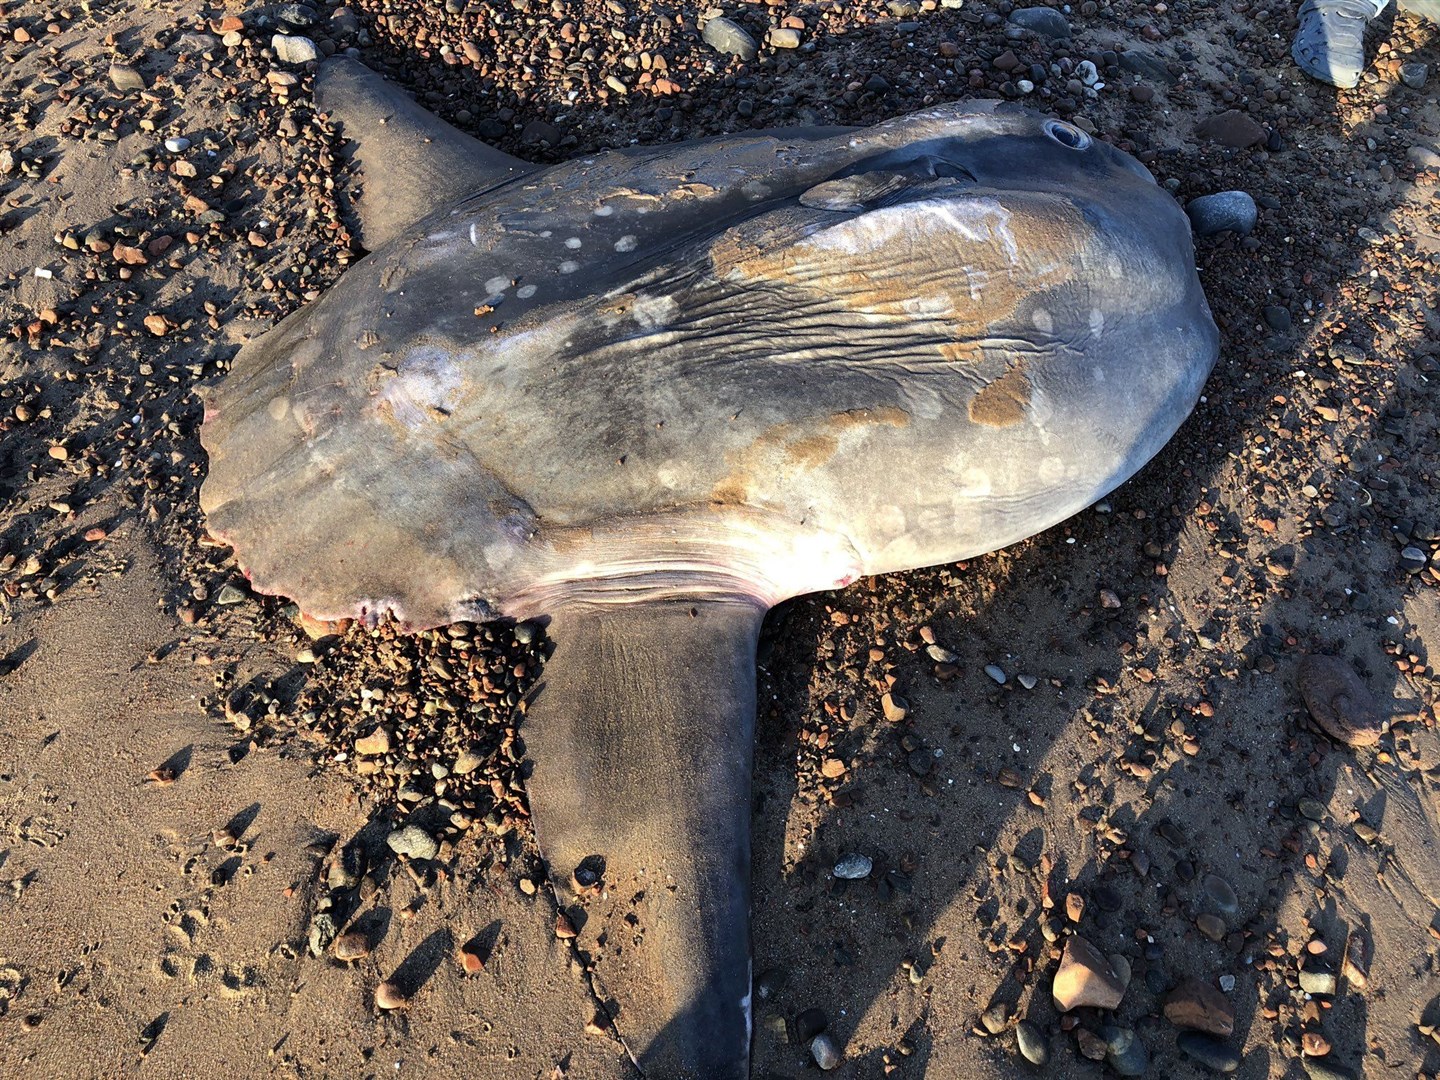 An Ocean Sunfish washed up on Rosemarkie beach. Picture: Wendy Maltinsky